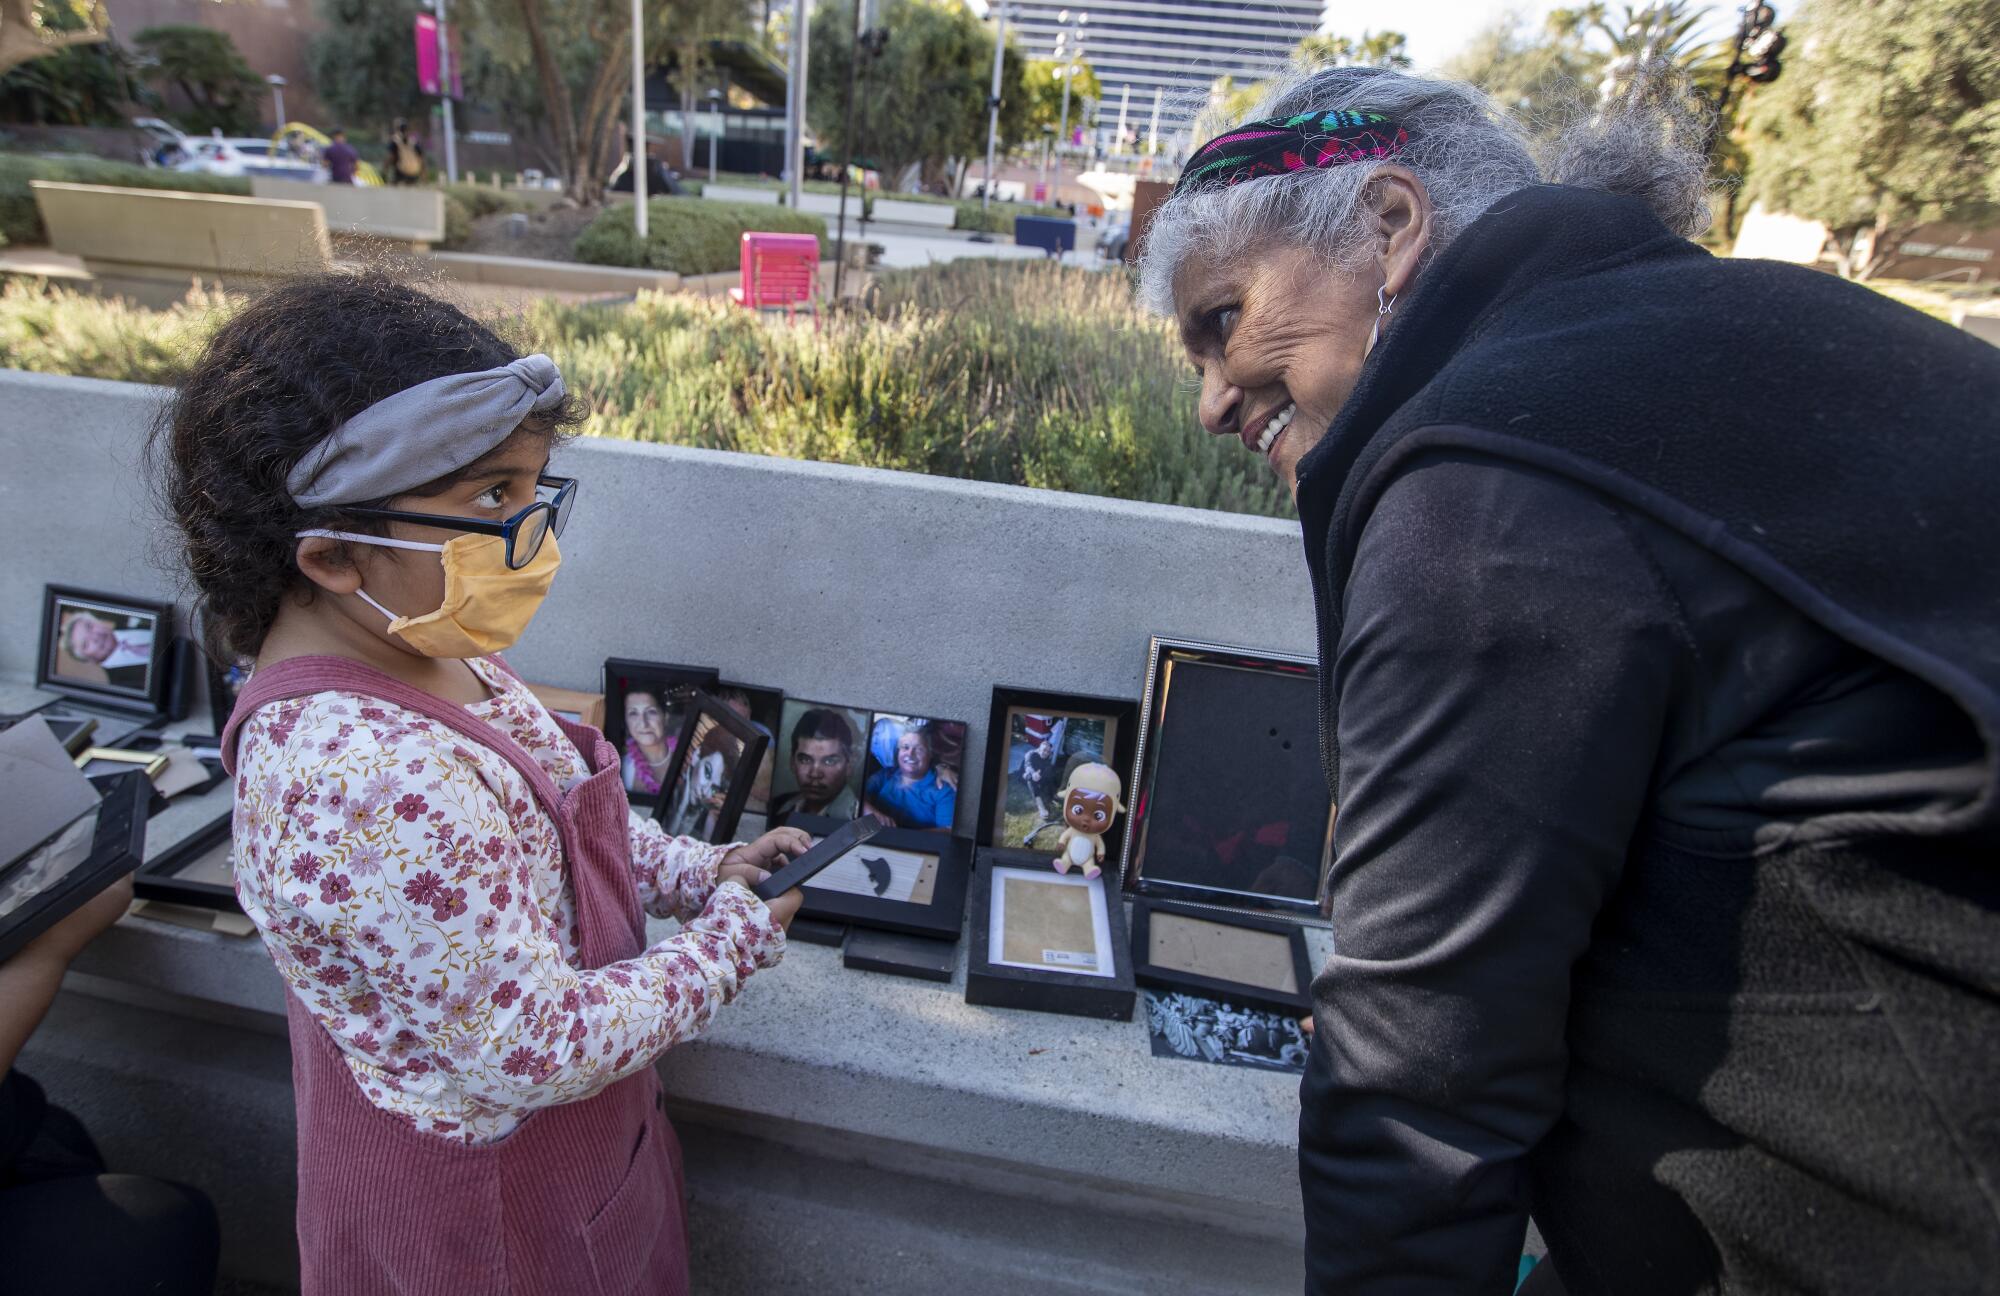 A young girl and an elderly woman put photographs of people into frames.